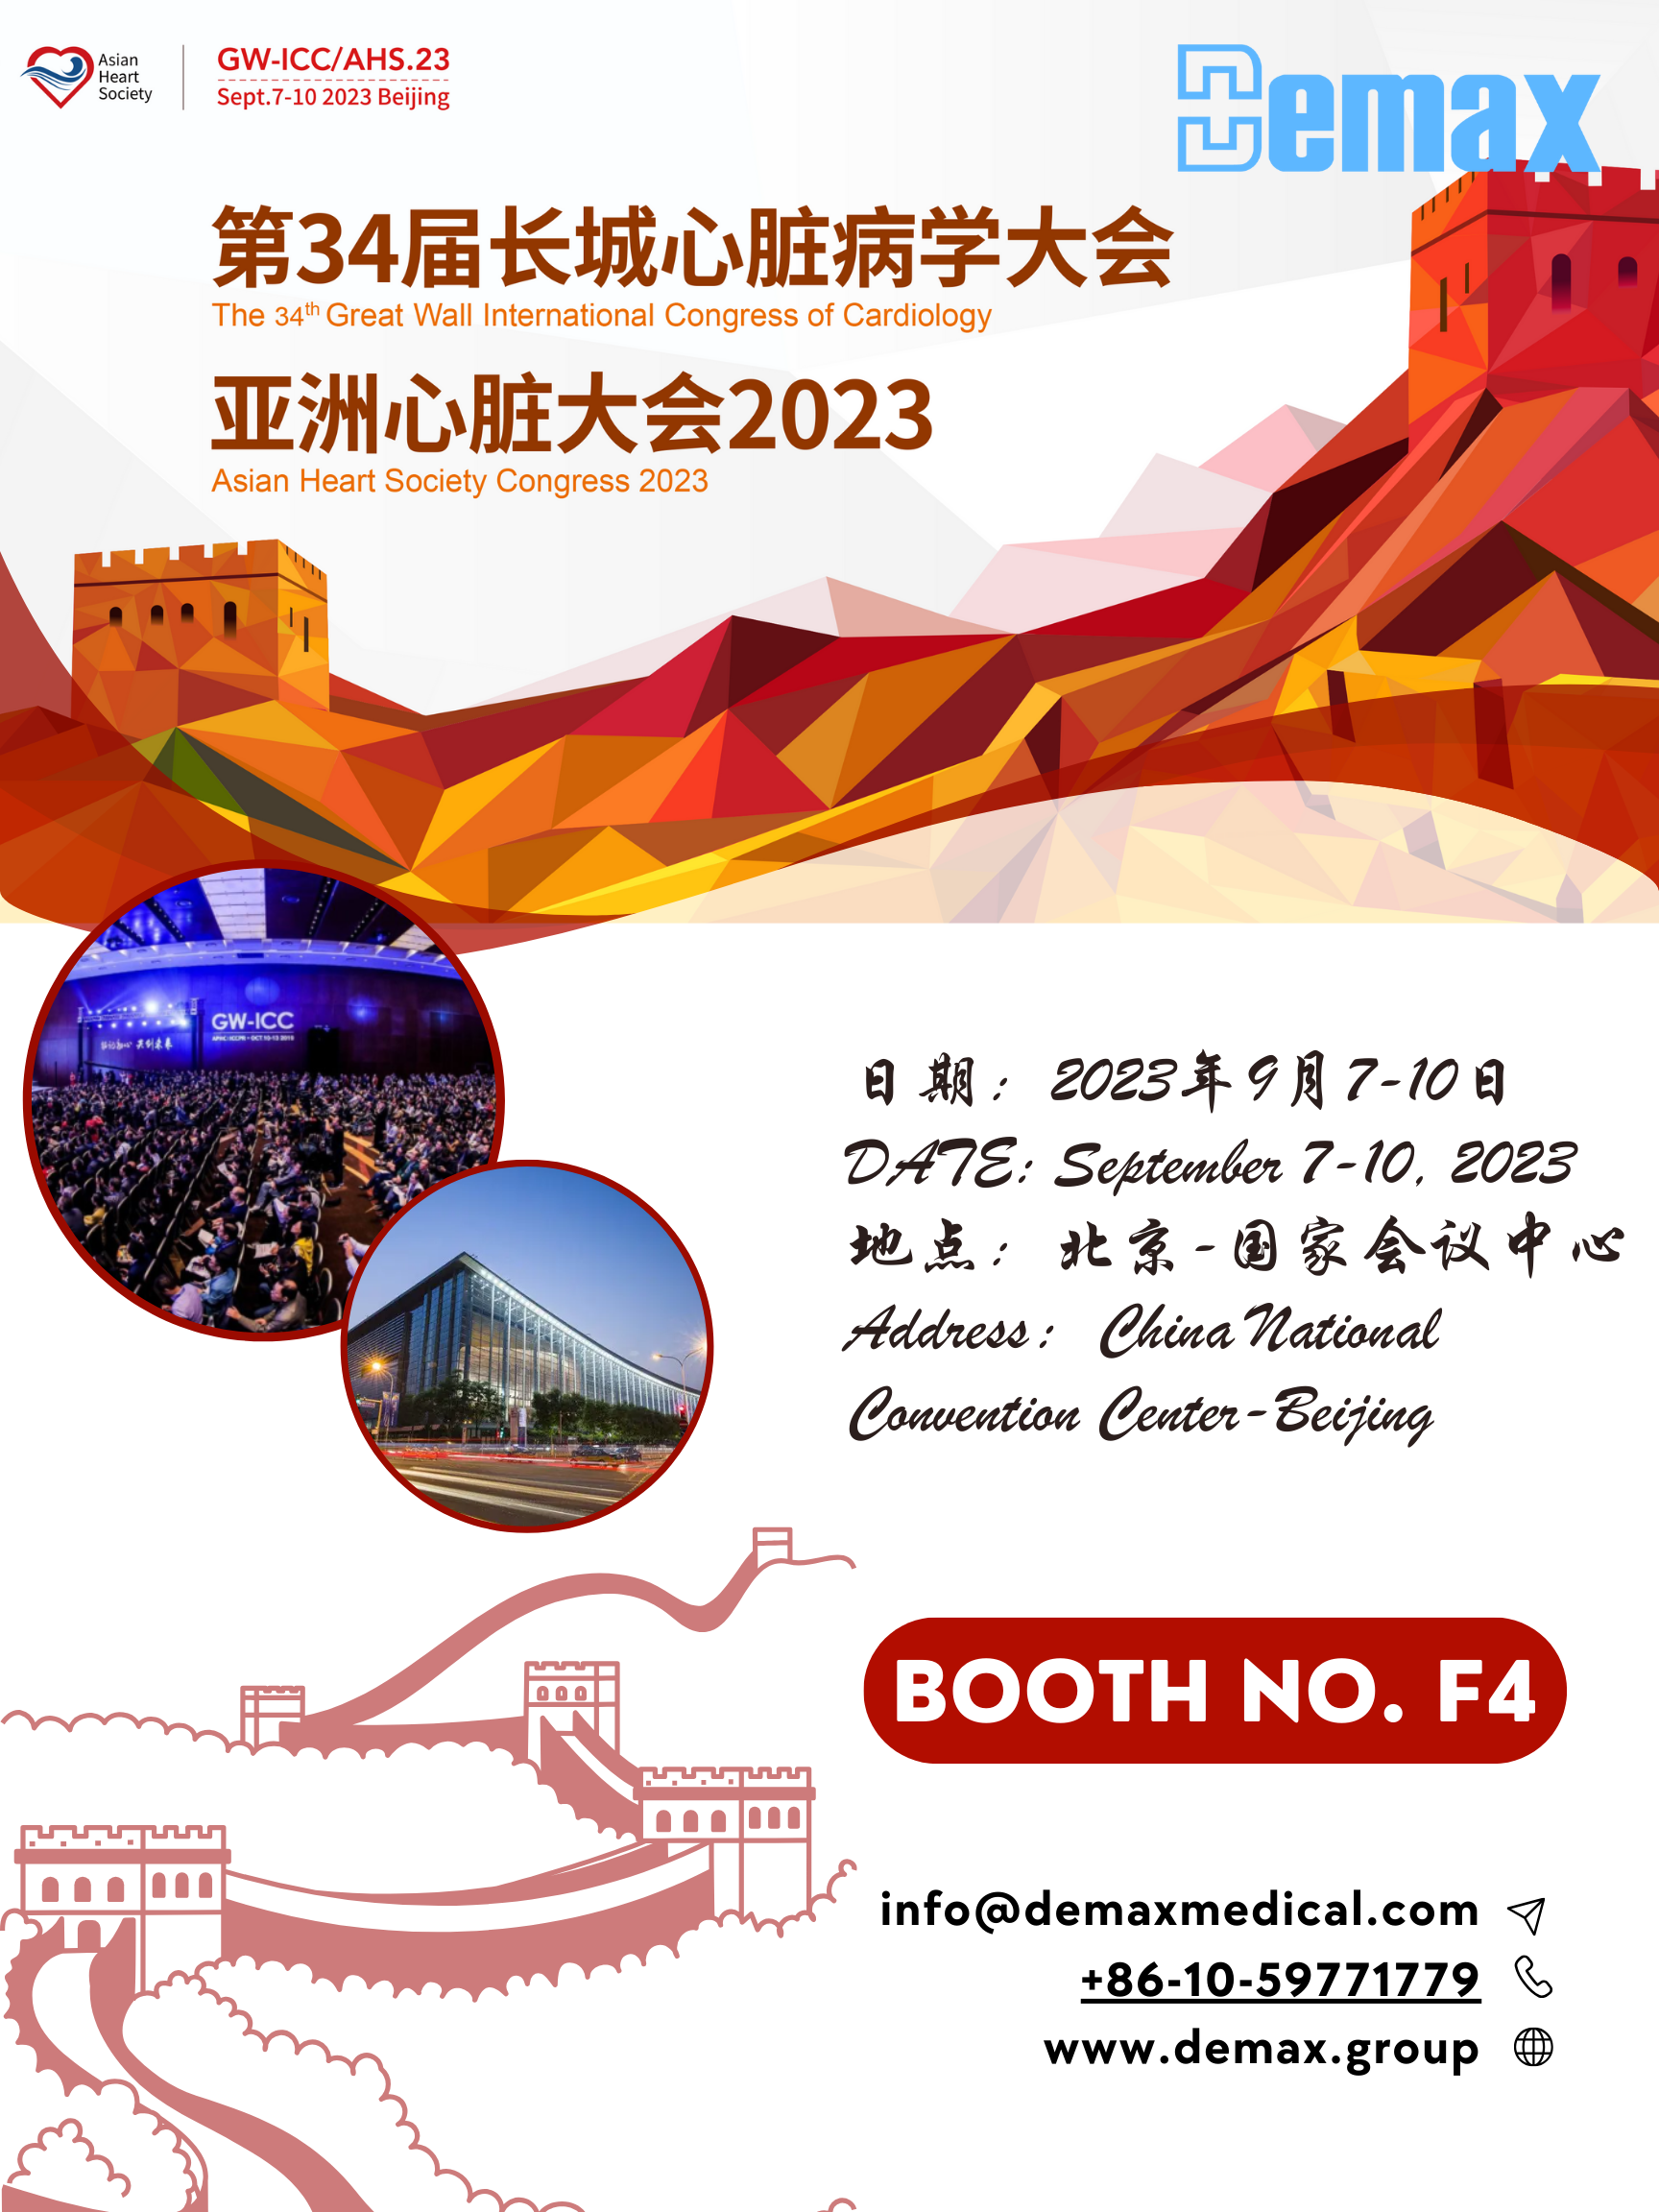 【Countdown to 3 days】2023GW-ICC DEMAX Booth F4 , Share the grand event of the Great Wall